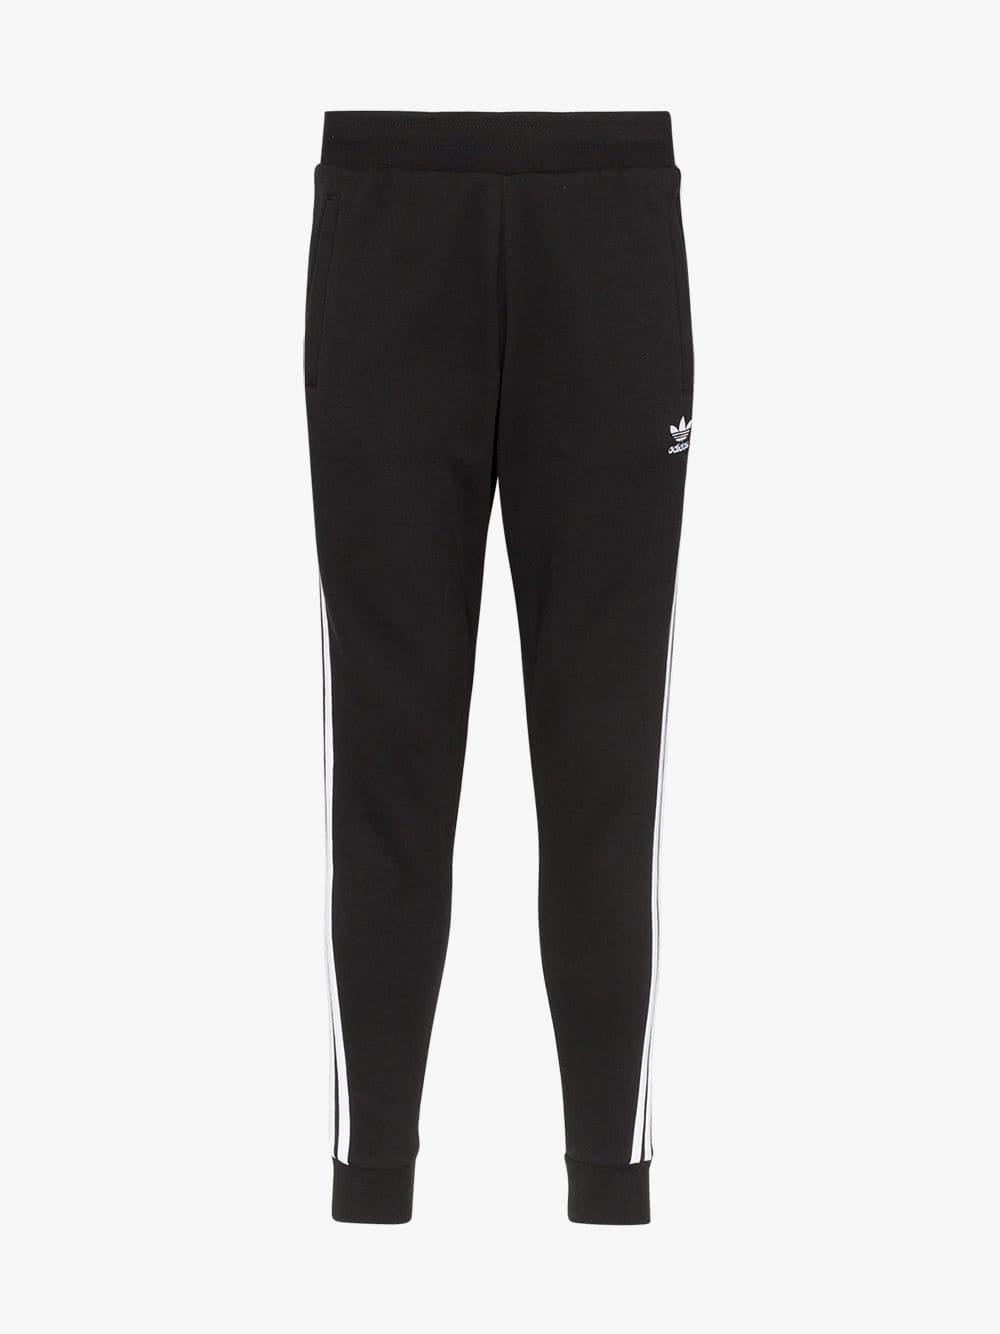 adidas Tapered Slim Track Pants in Black for Men - Lyst